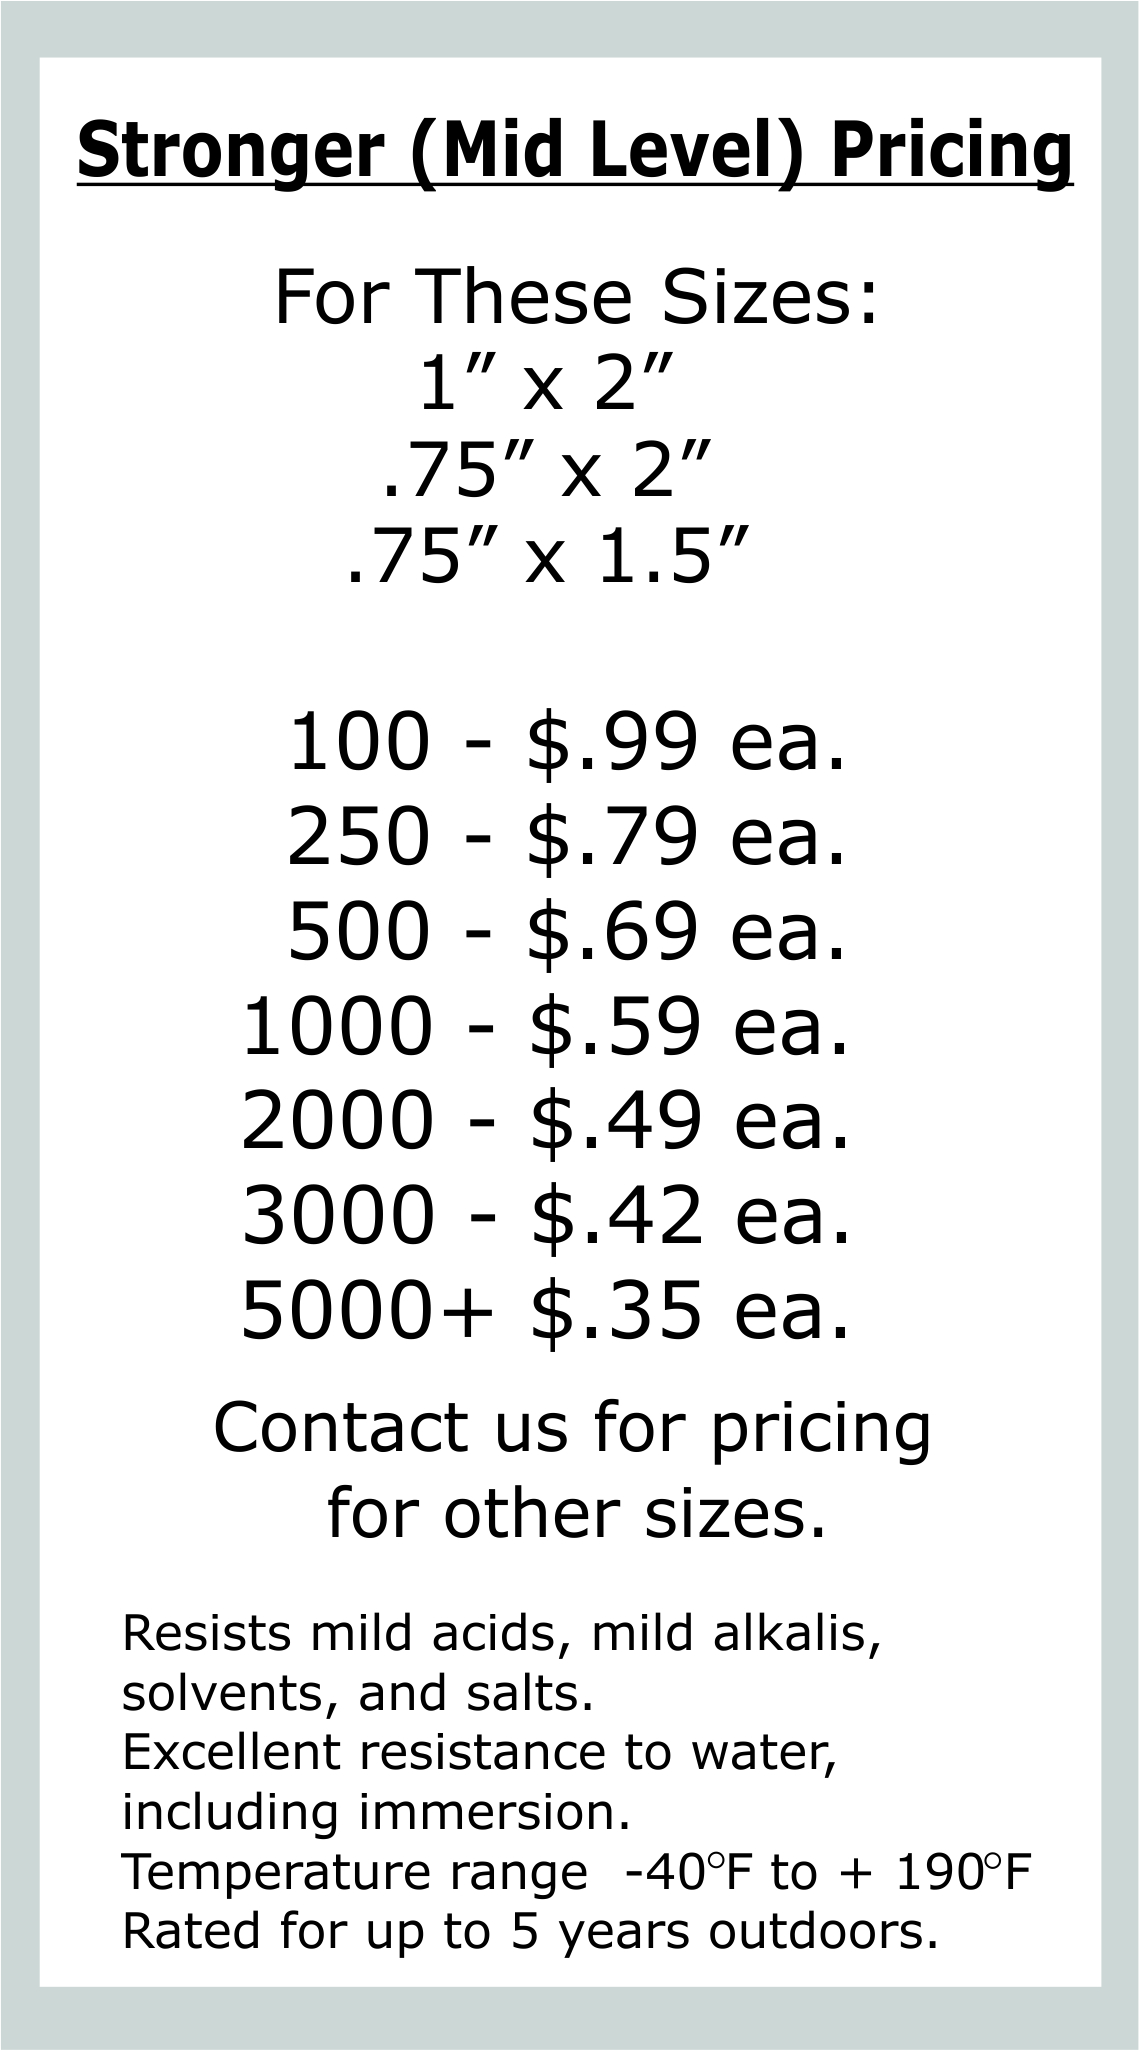 this is the pricing for our stronger level asset tags for equipment